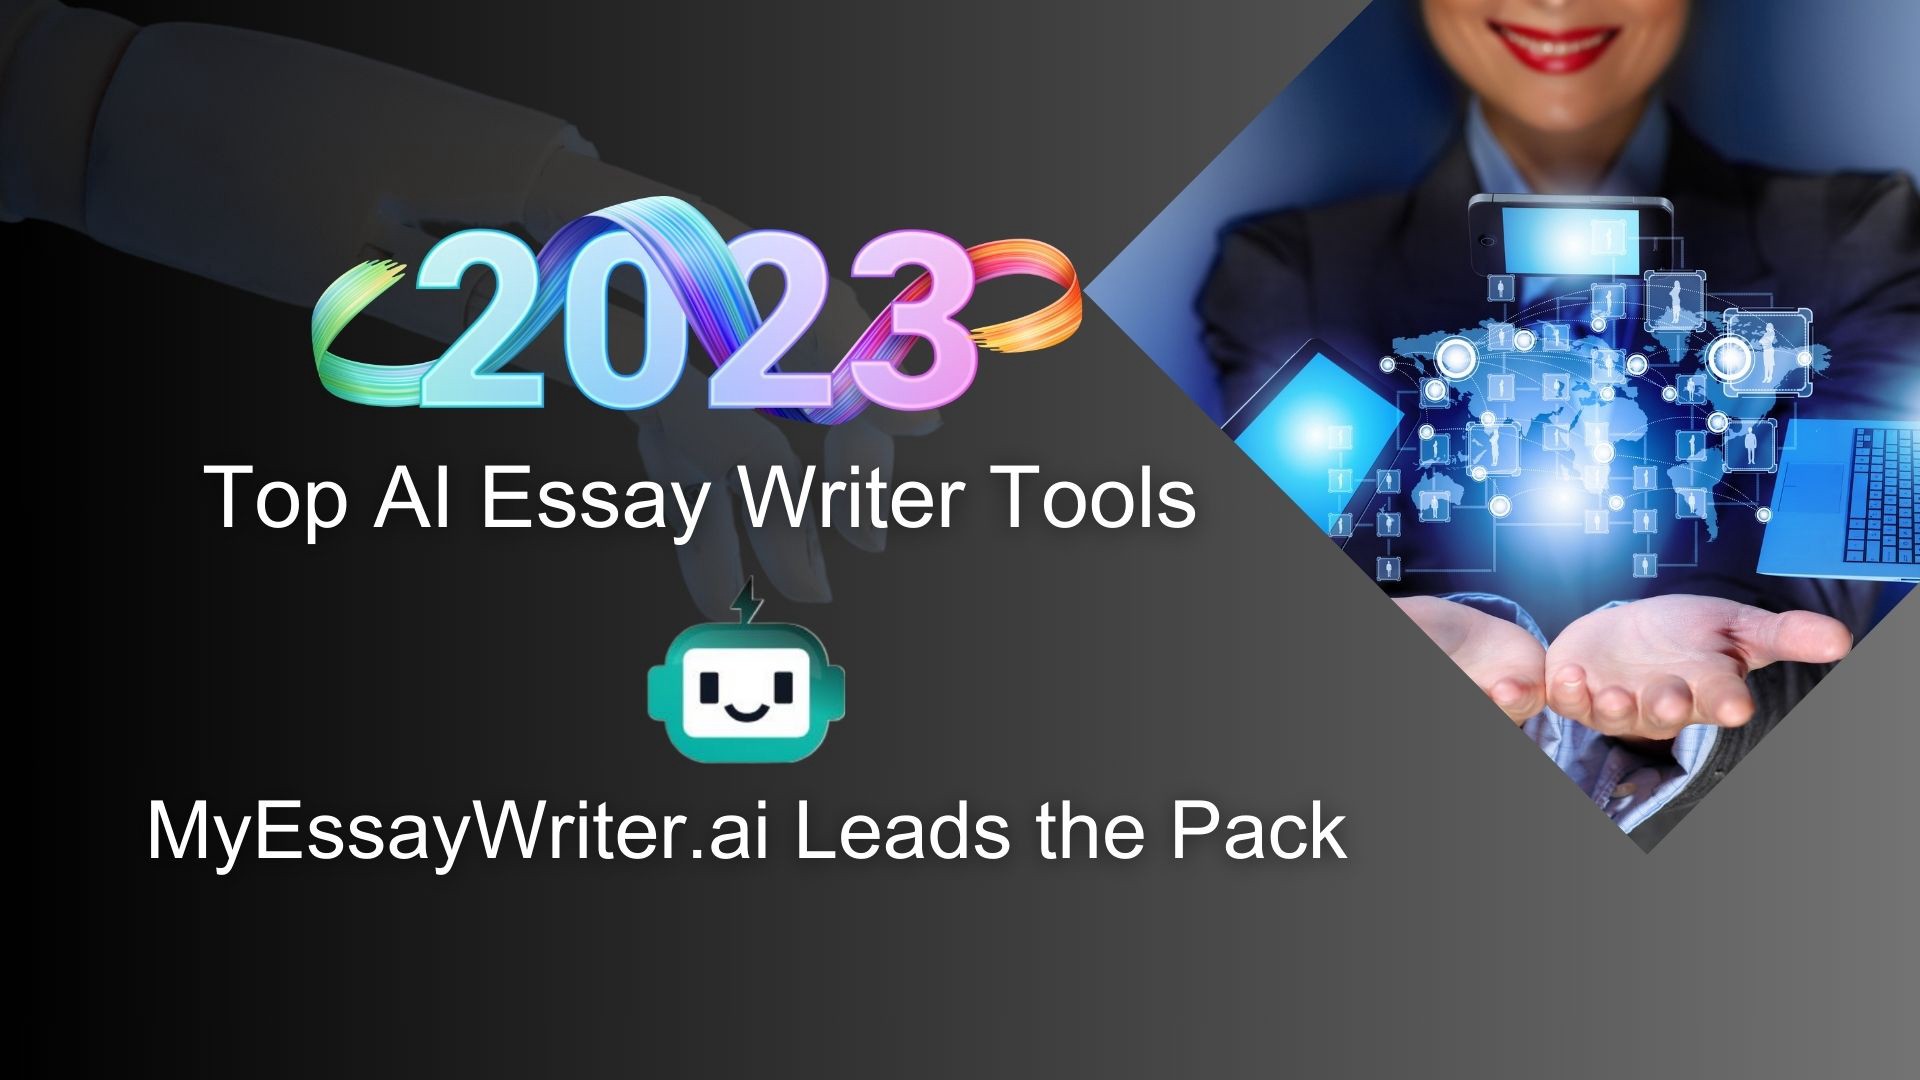 2023 Top AI Essay Writer Tools: MyEssayWriter.ai Leads the Pack by Rick  Beaver | Baskadia